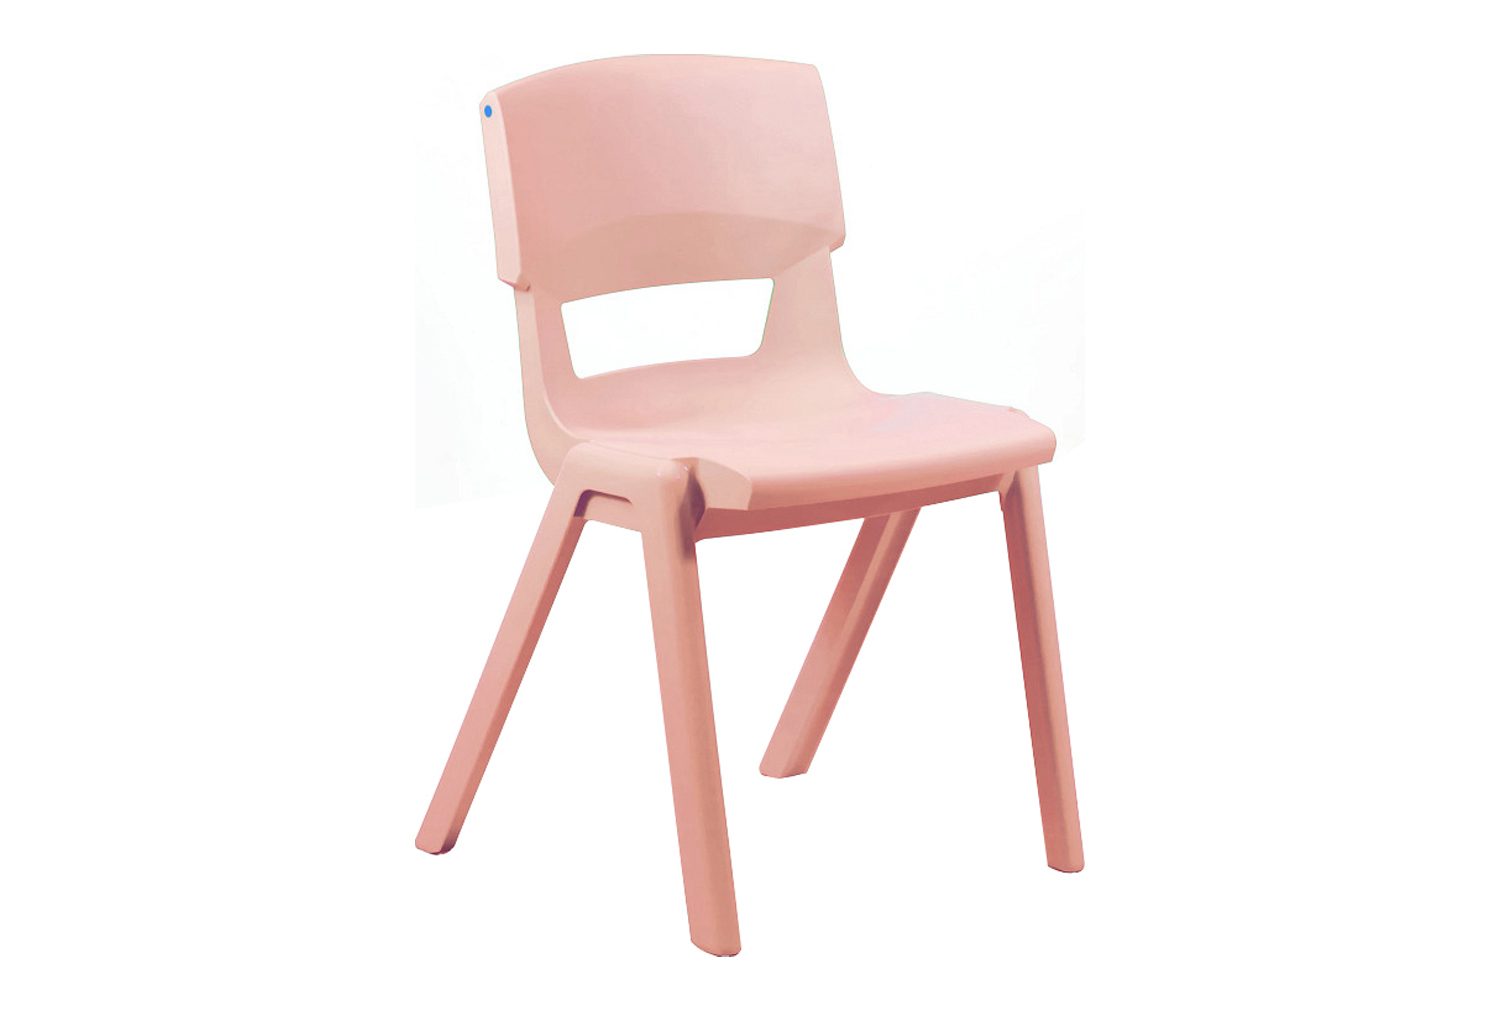 Qty 10 - Postura+ Classroom Chair, 14+ Years - 38wx37dx46h (cm), Rose Blossom